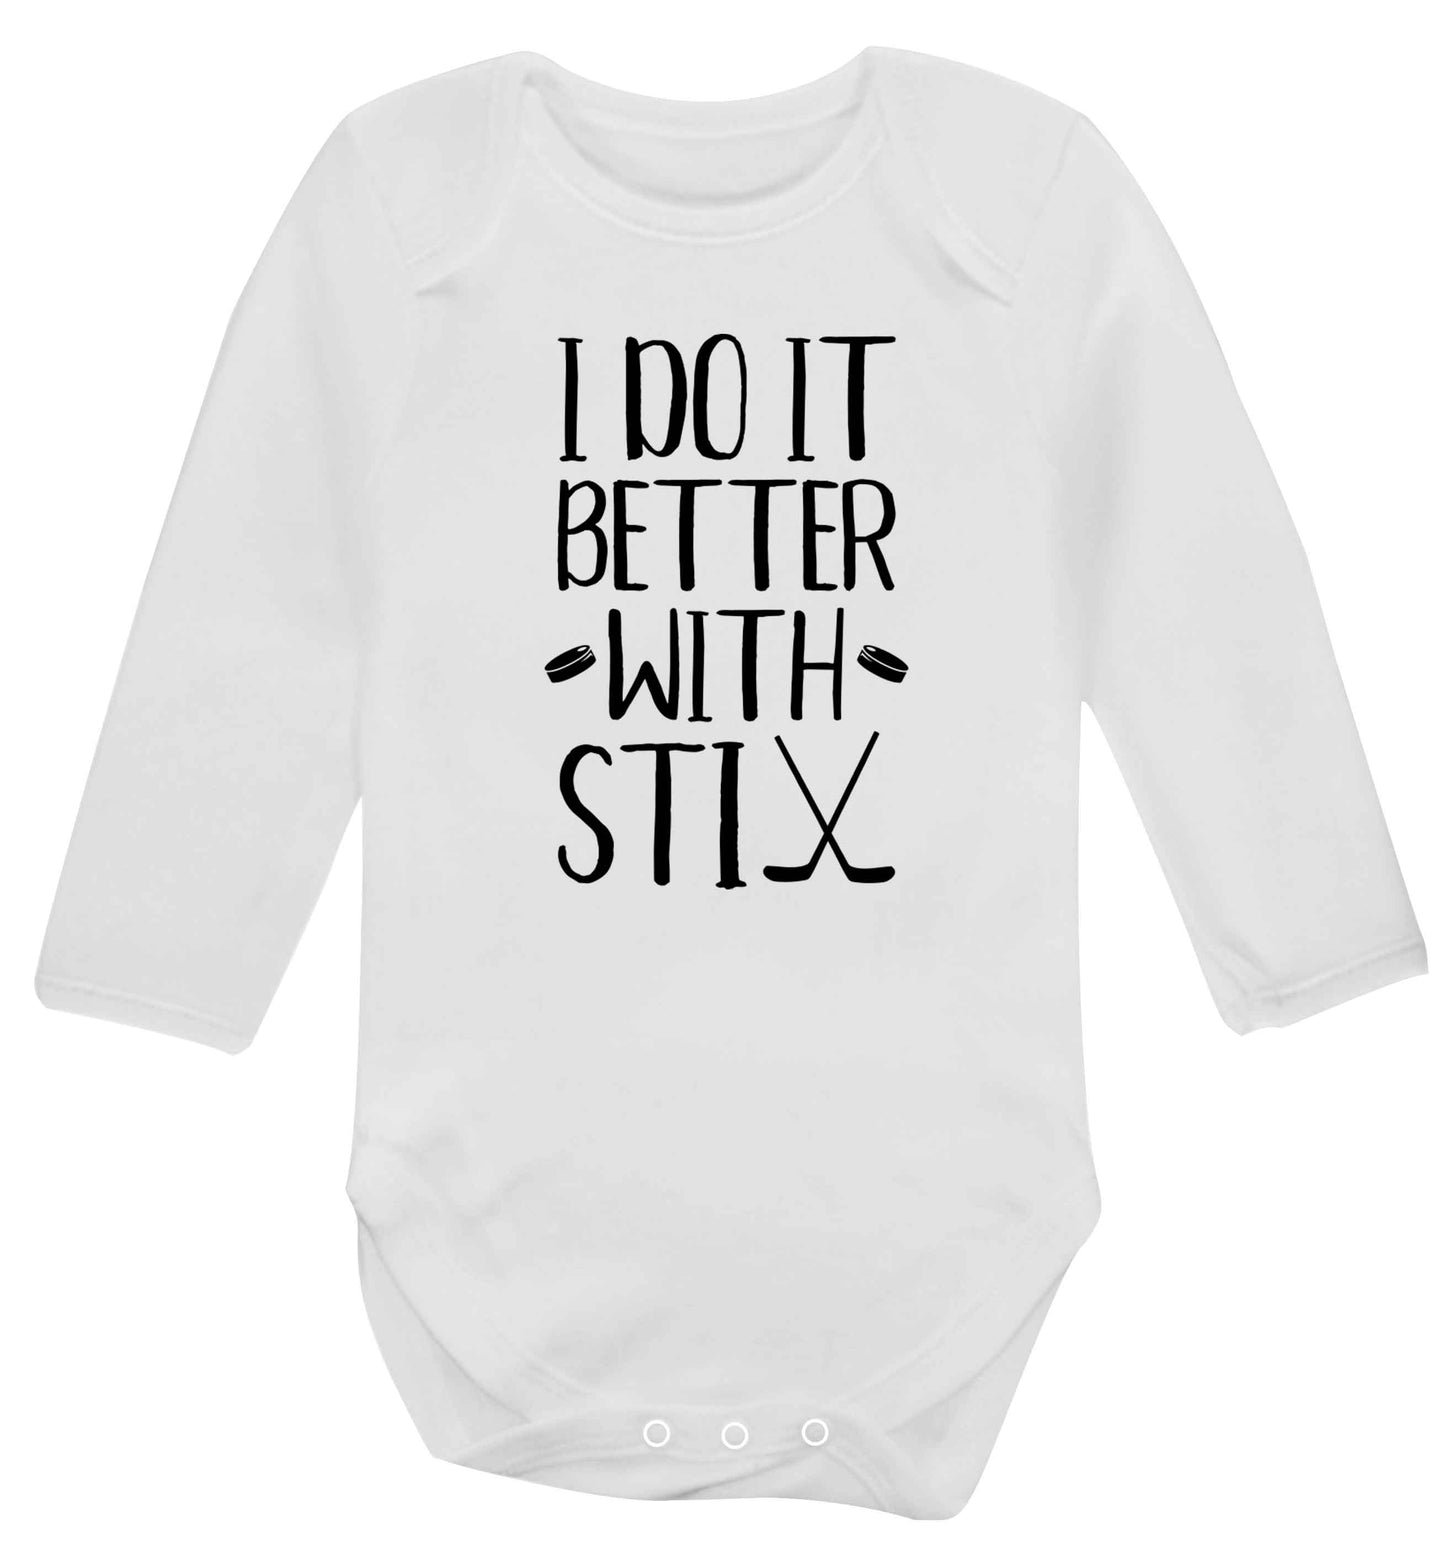 I do it better with stix (hockey) Baby Vest long sleeved white 6-12 months